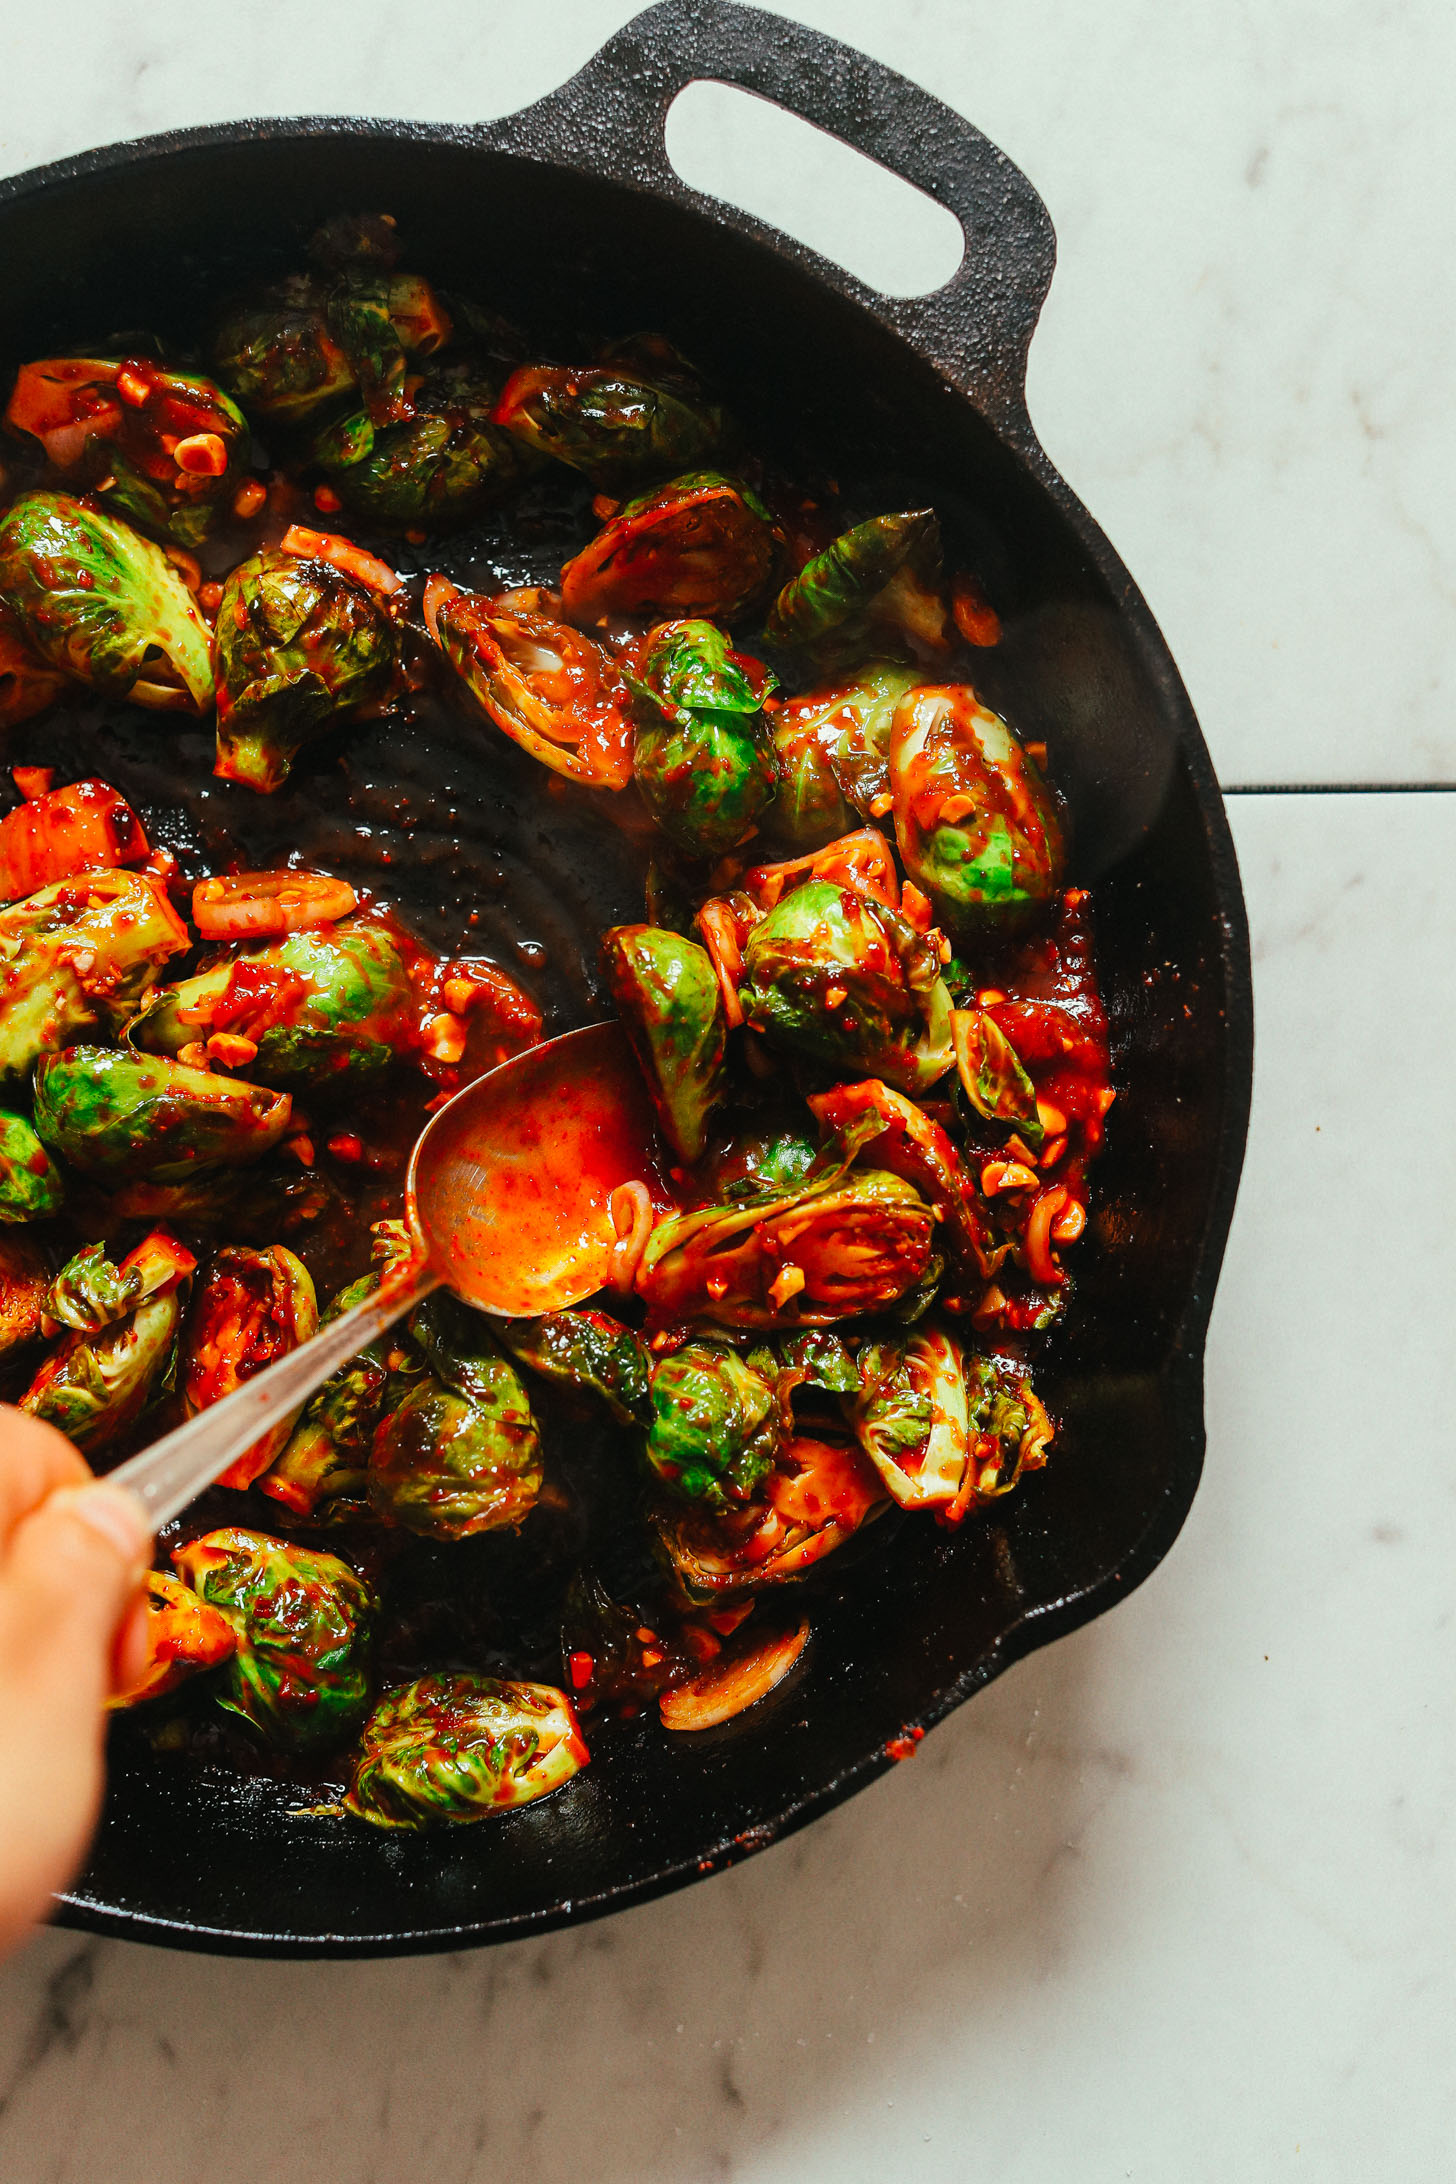 Cast-iron skillet filled with our vegan Gochujang Brussels Sprouts recipe